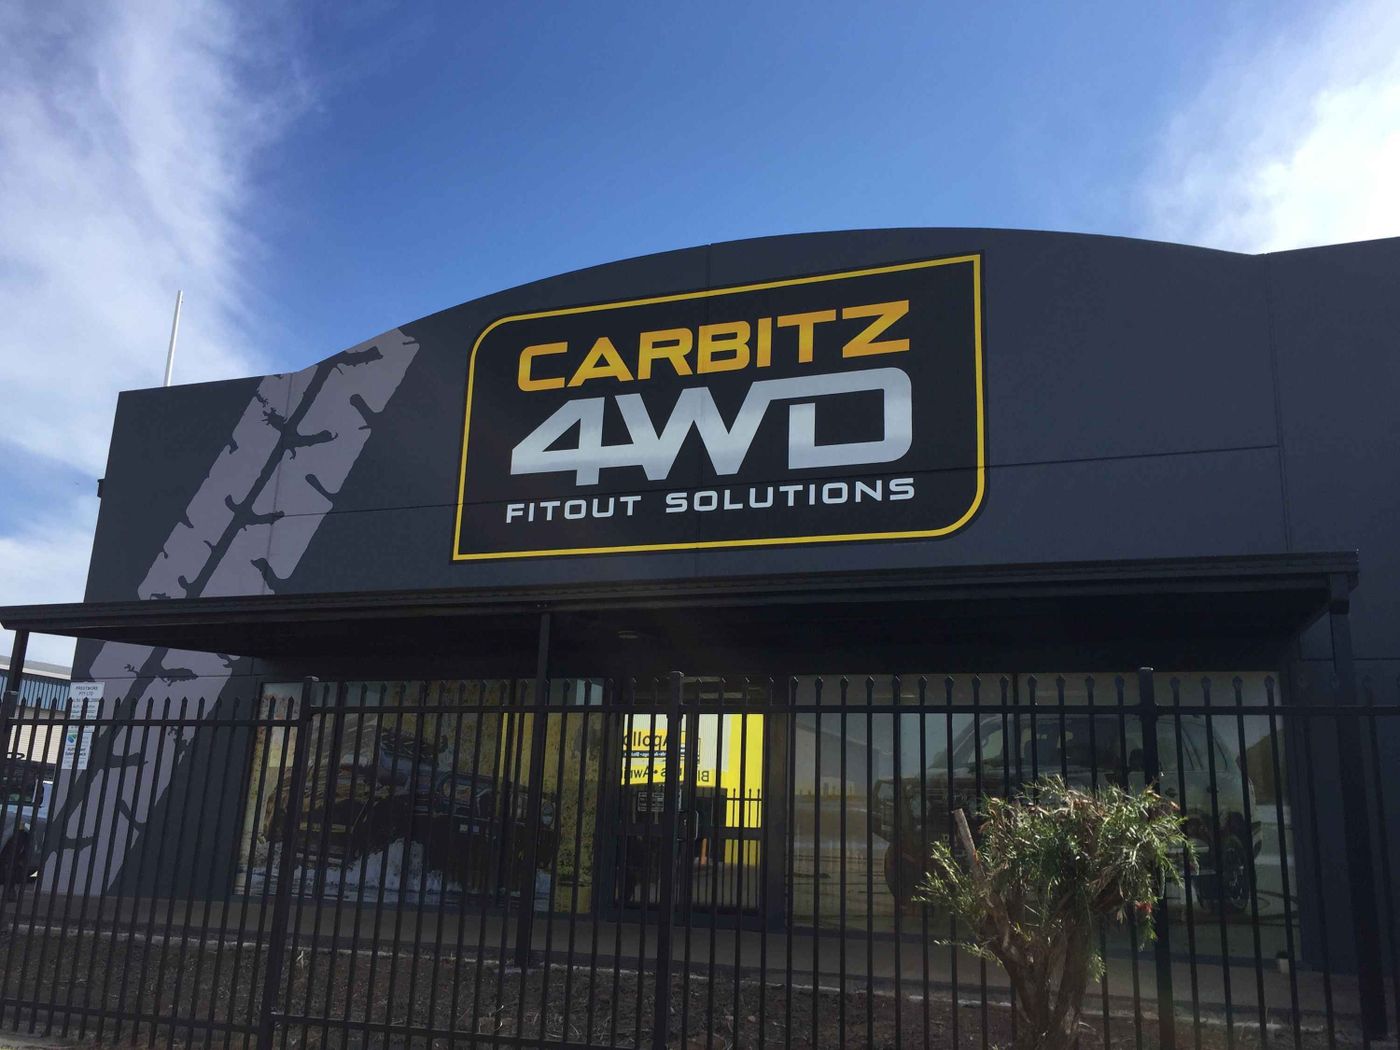 Carbitz 4WD Fitout Solutions image